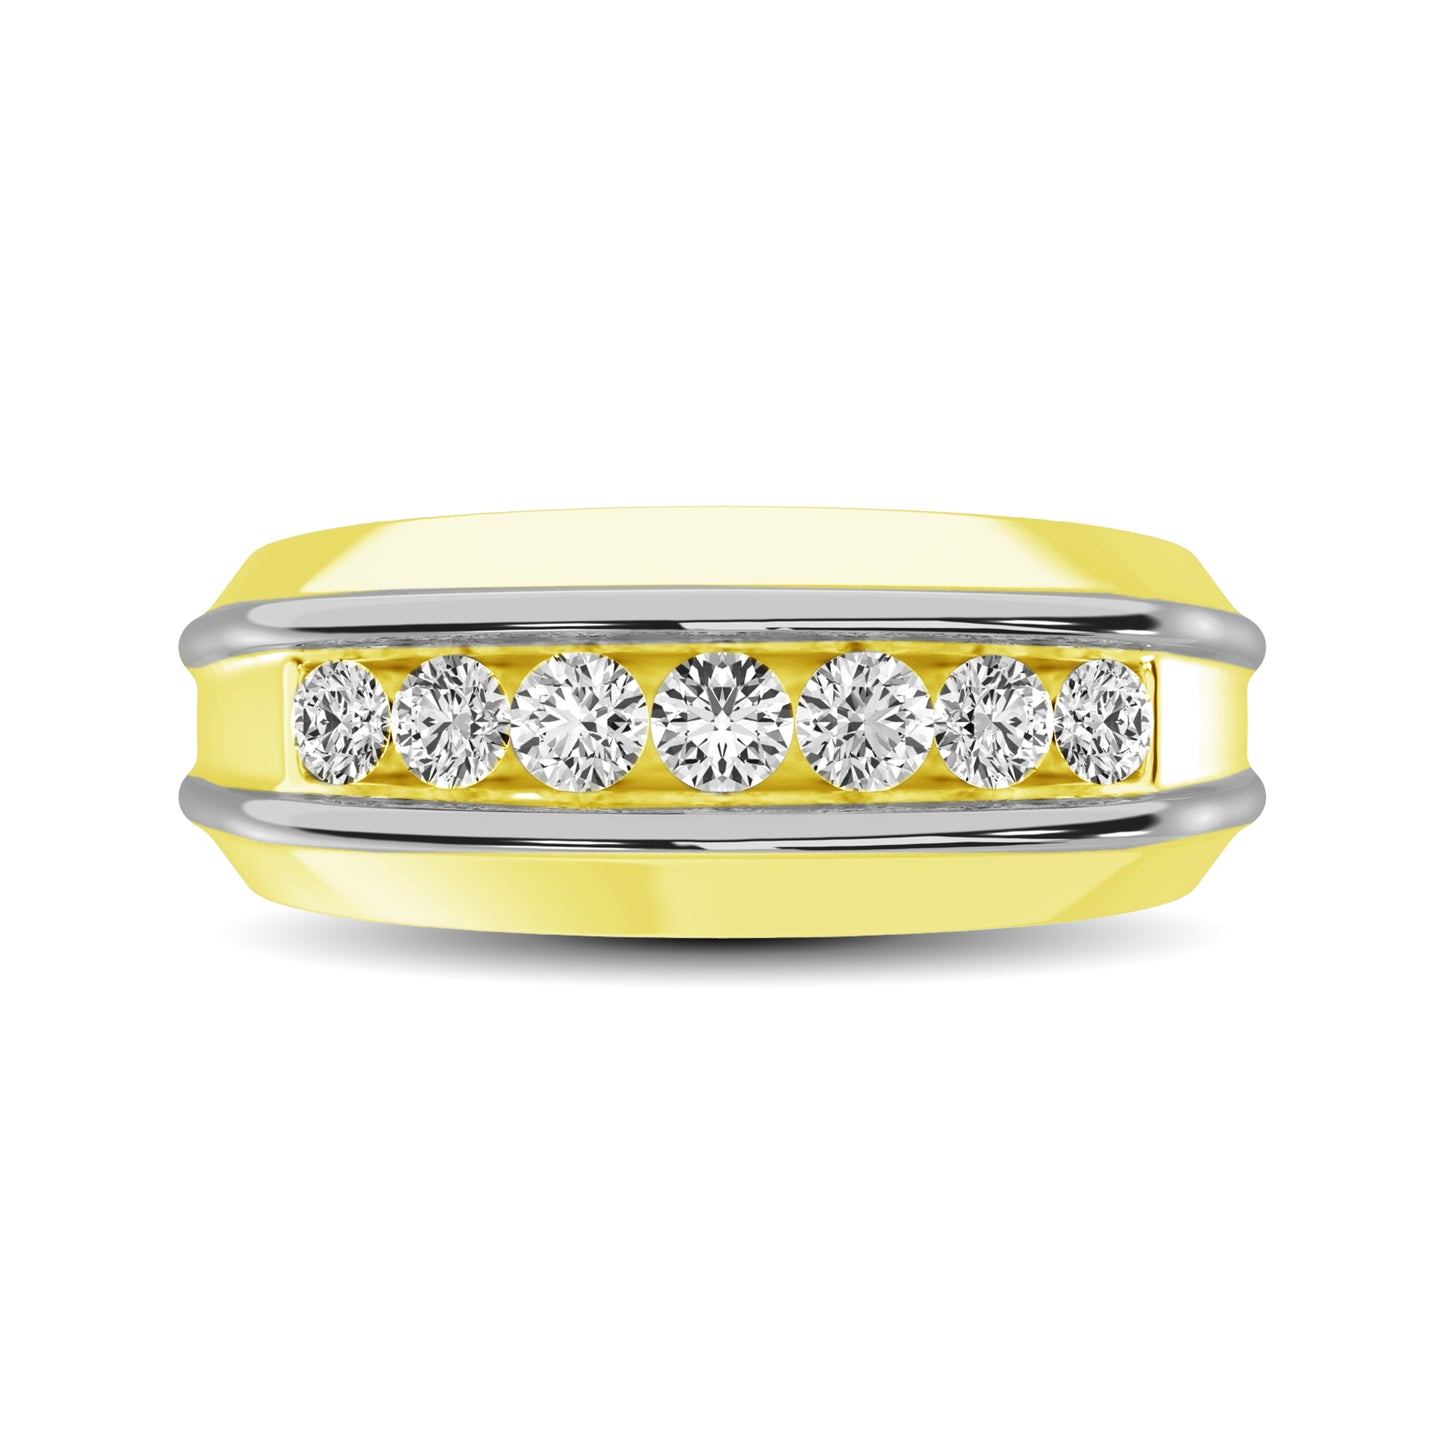 10K Yellow Gold with Accent of 10K White Gold 1/4 Ct.Tw. Diamond 7 Stone Mens Band